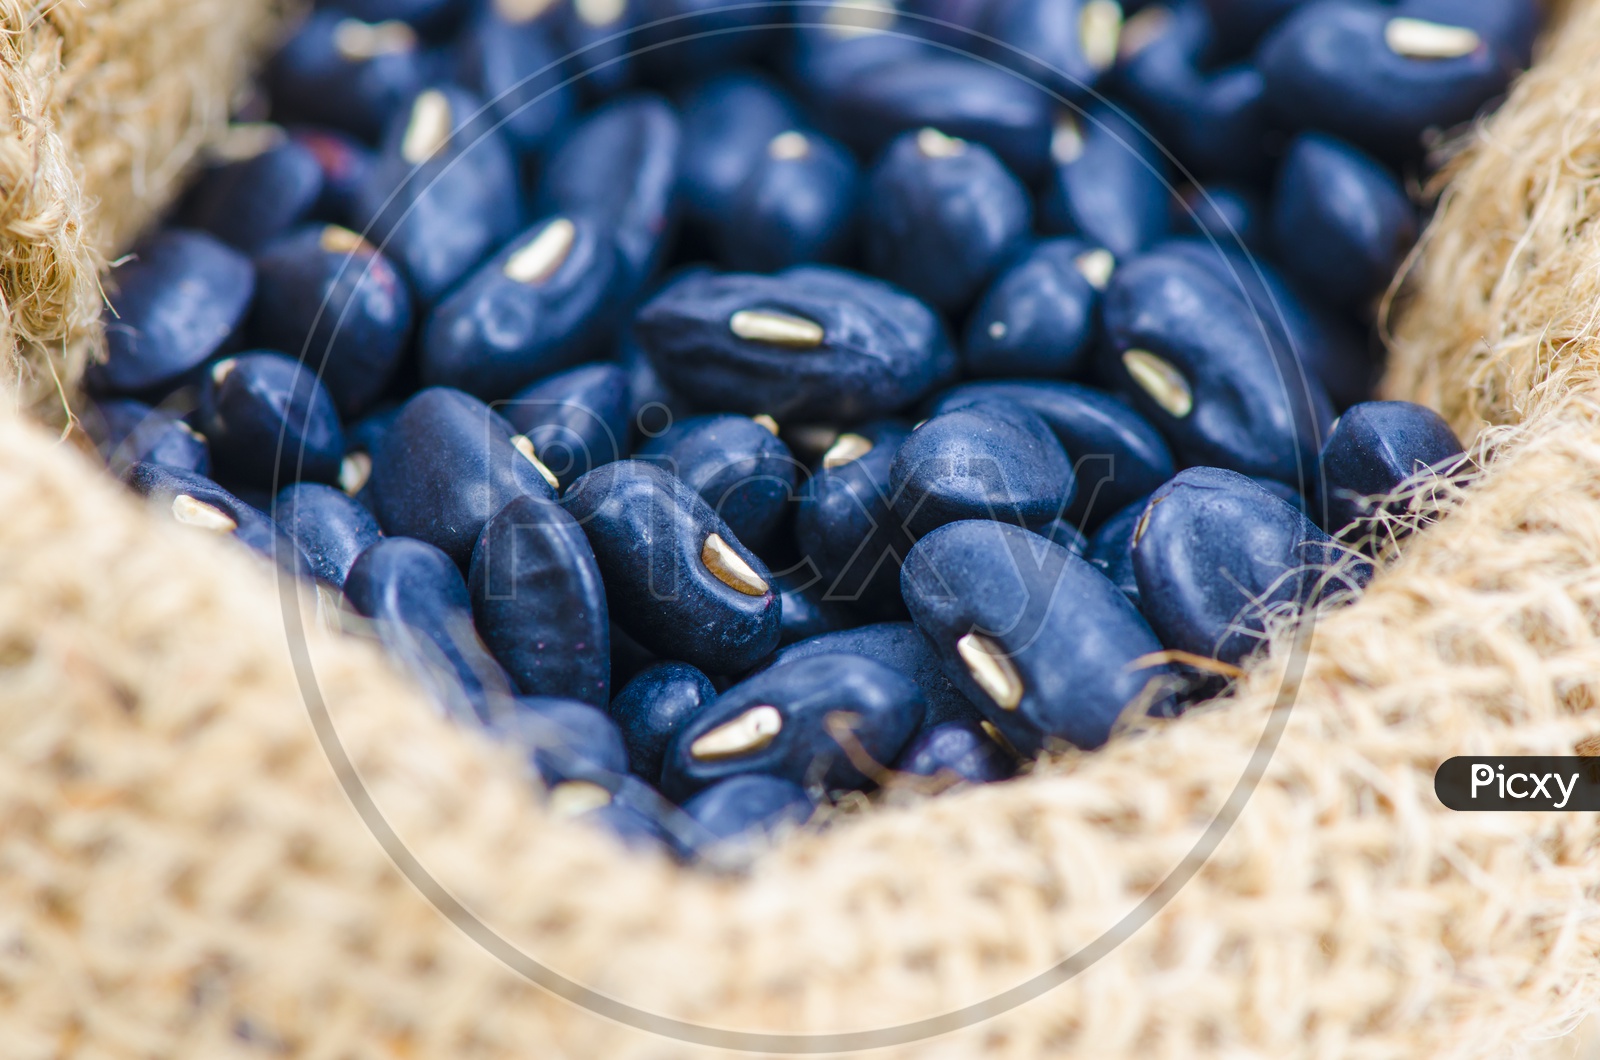 Closeup of Blue Beans in sack